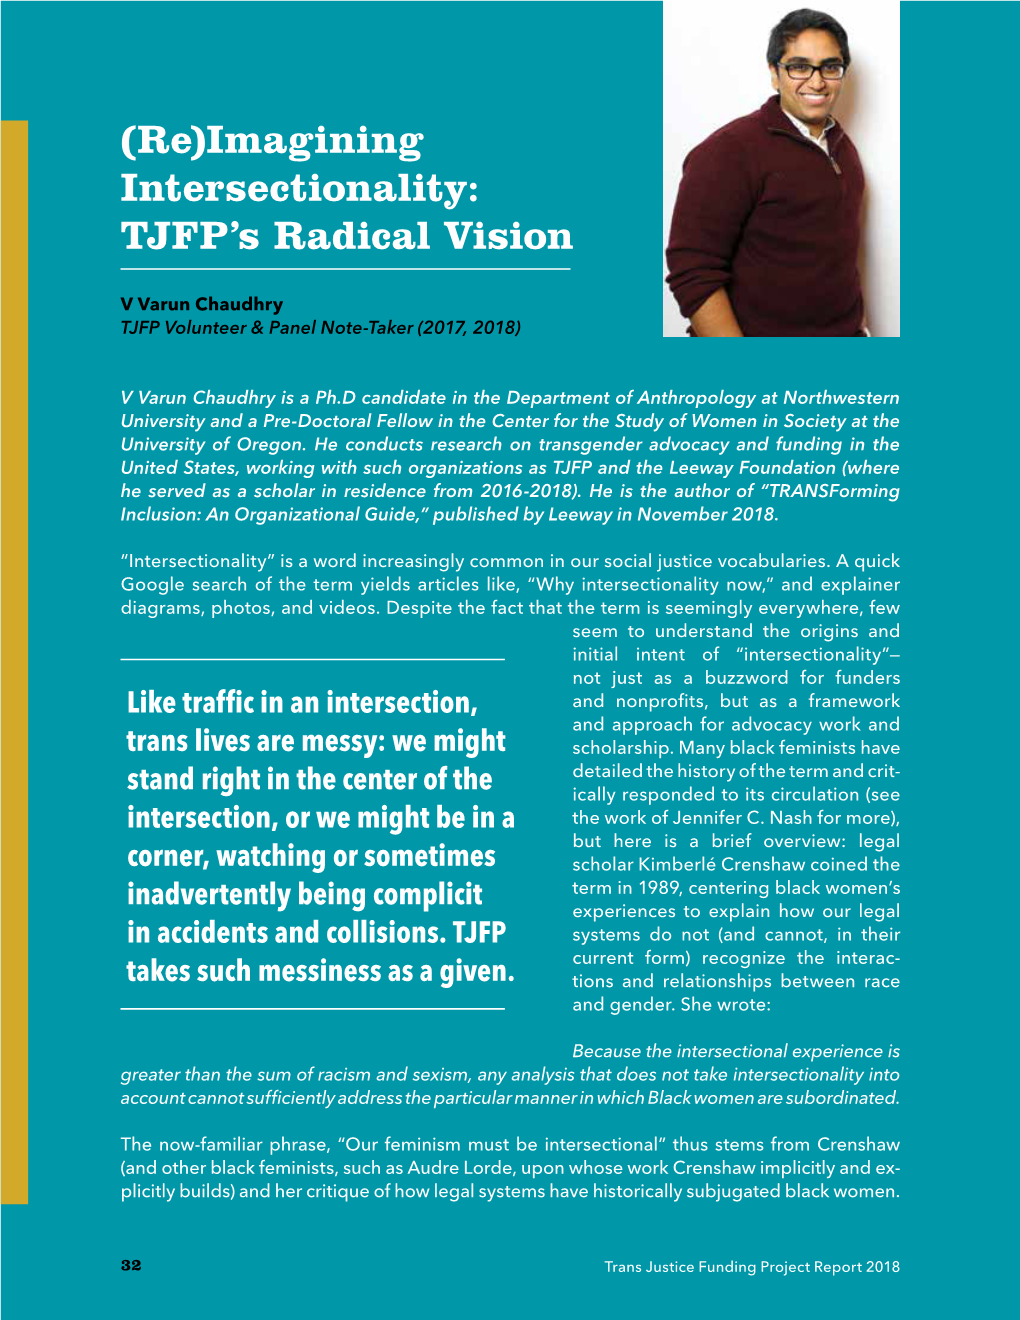 (Re)Imagining Intersectionality: TJFP's Radical Vision